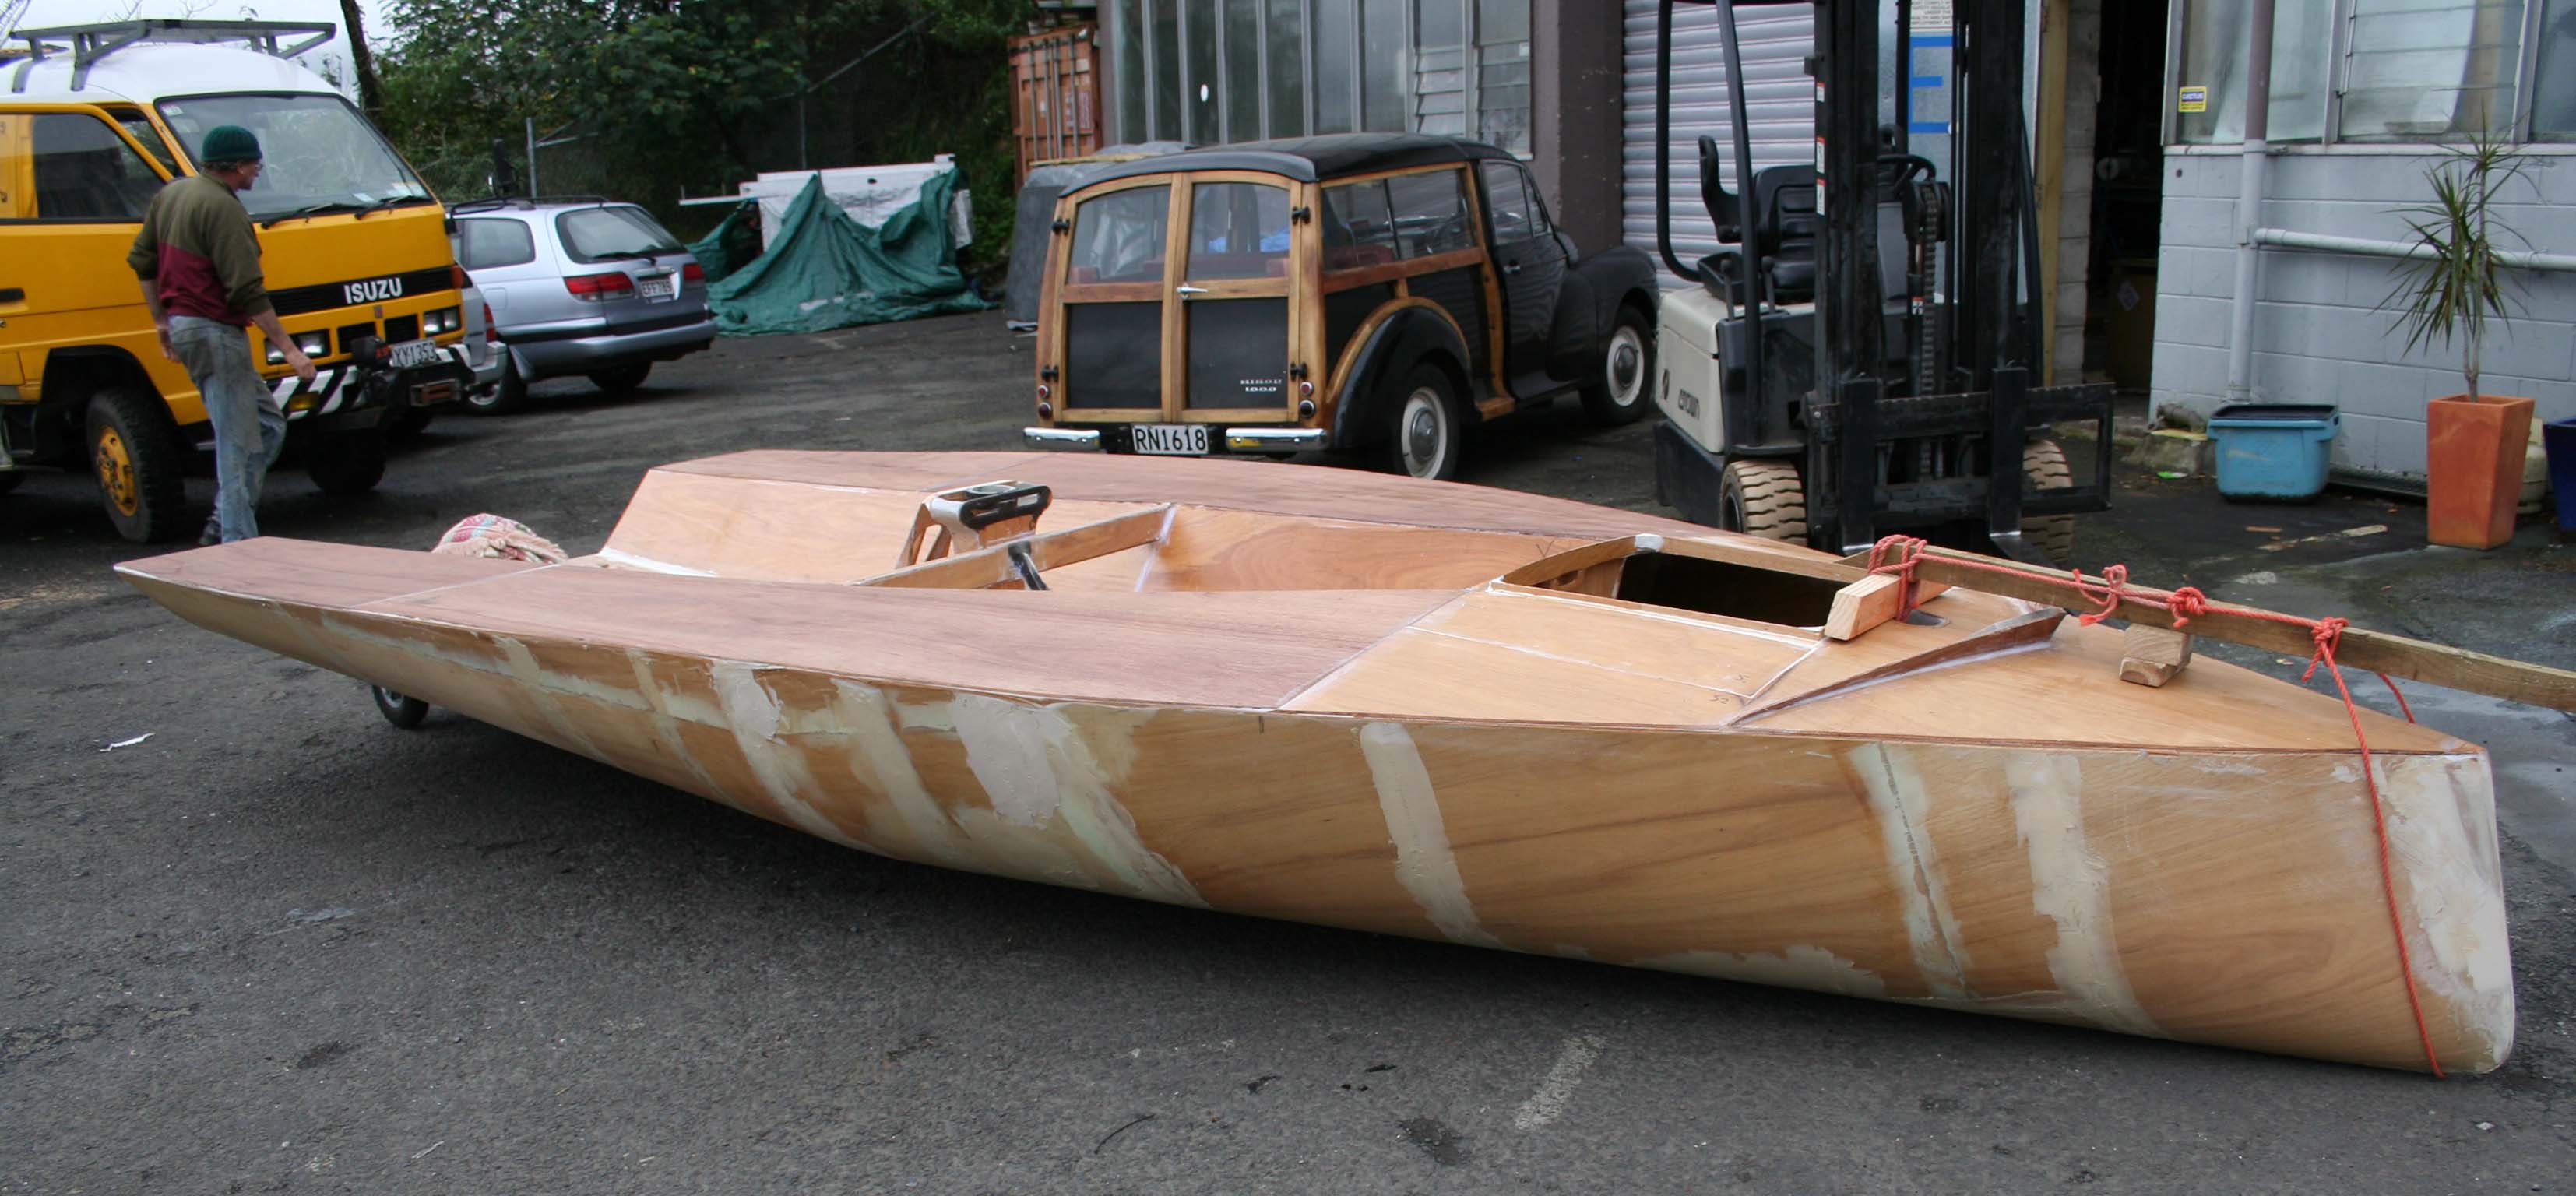 plywood sailboat plans how to building amazing diy boat